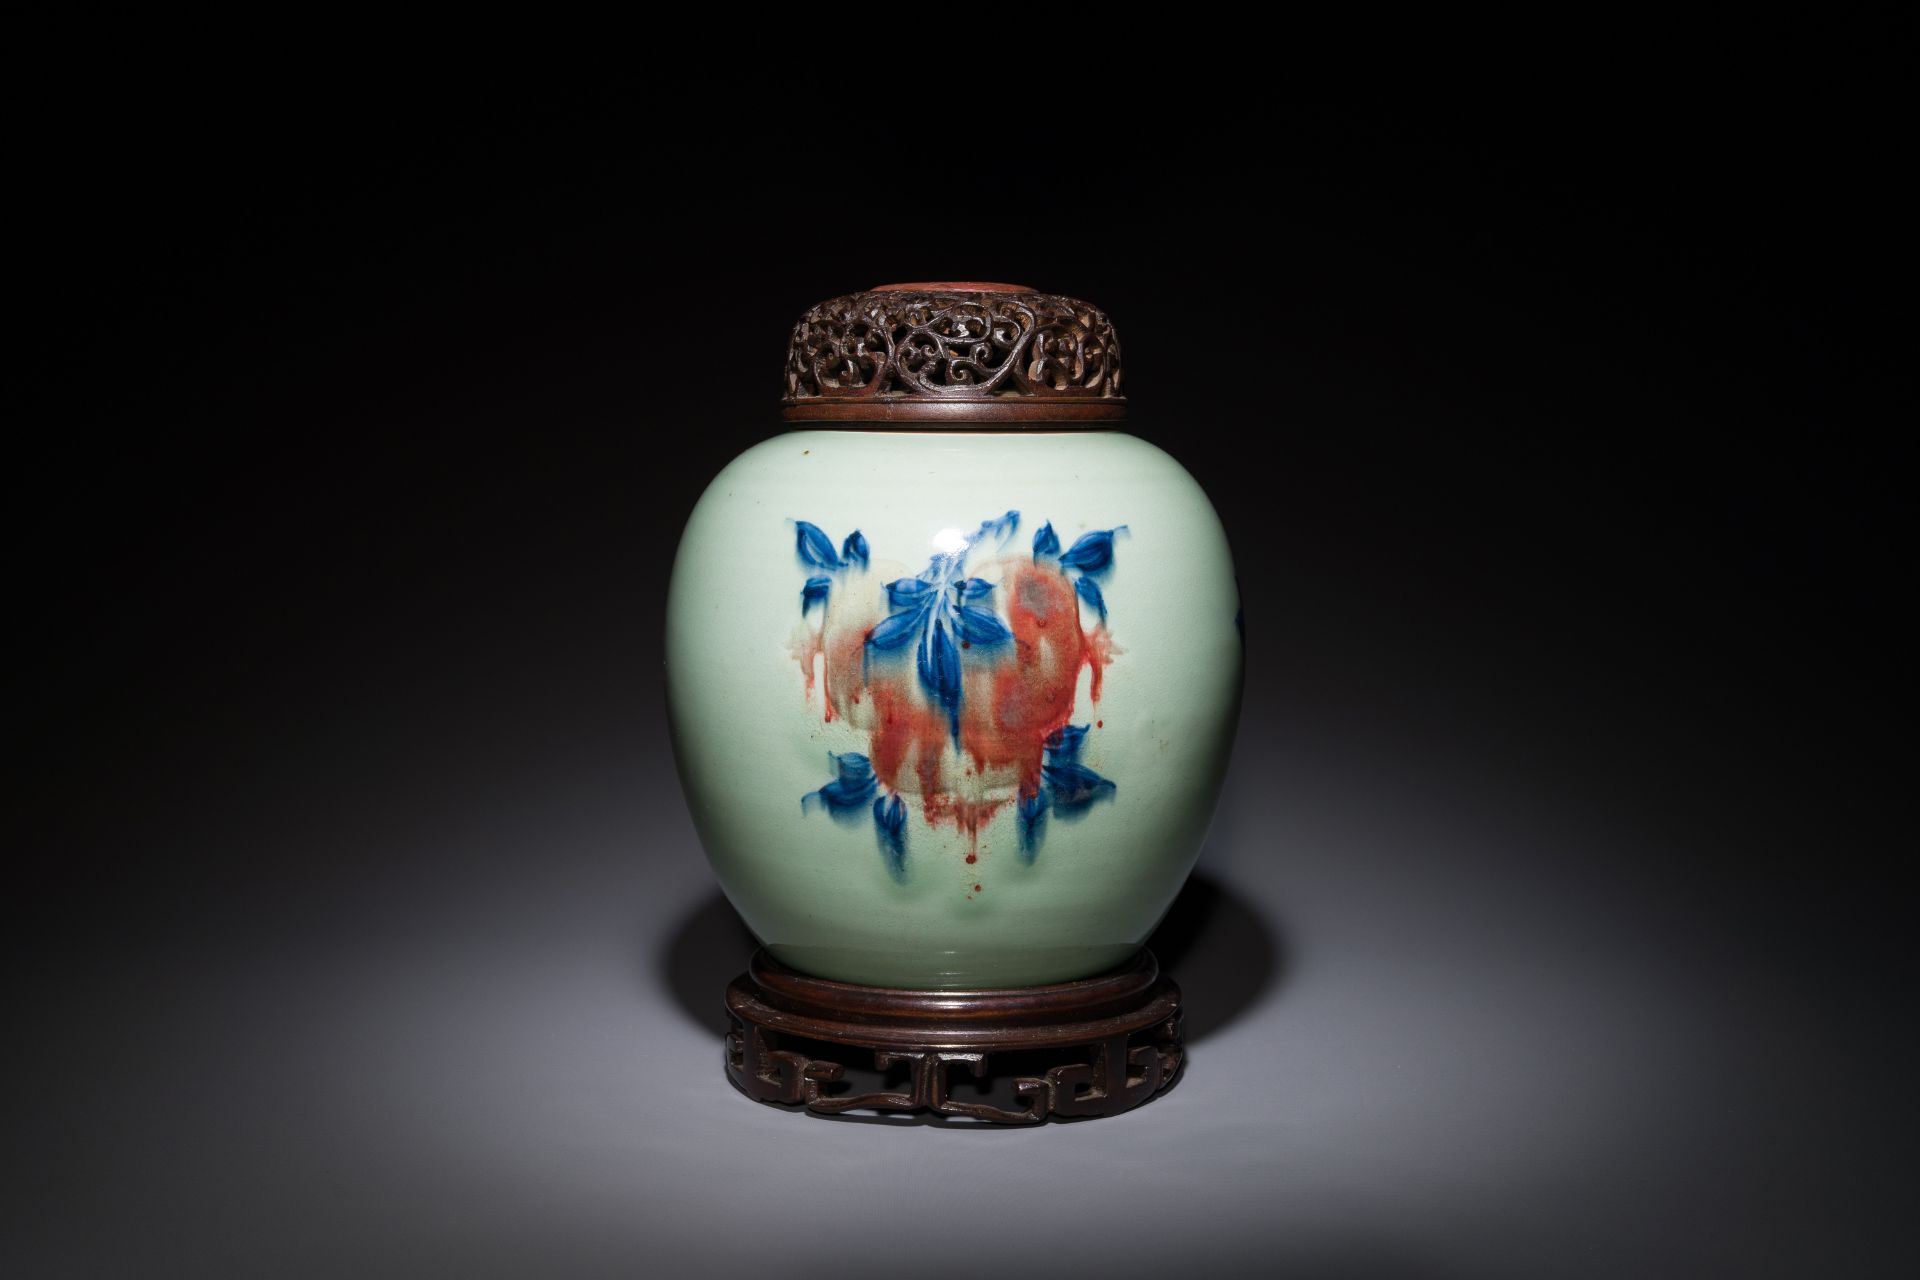 A Chinese celadon-ground blue, white and copper-red ginger jar with wooden cover and stand, 18th C.